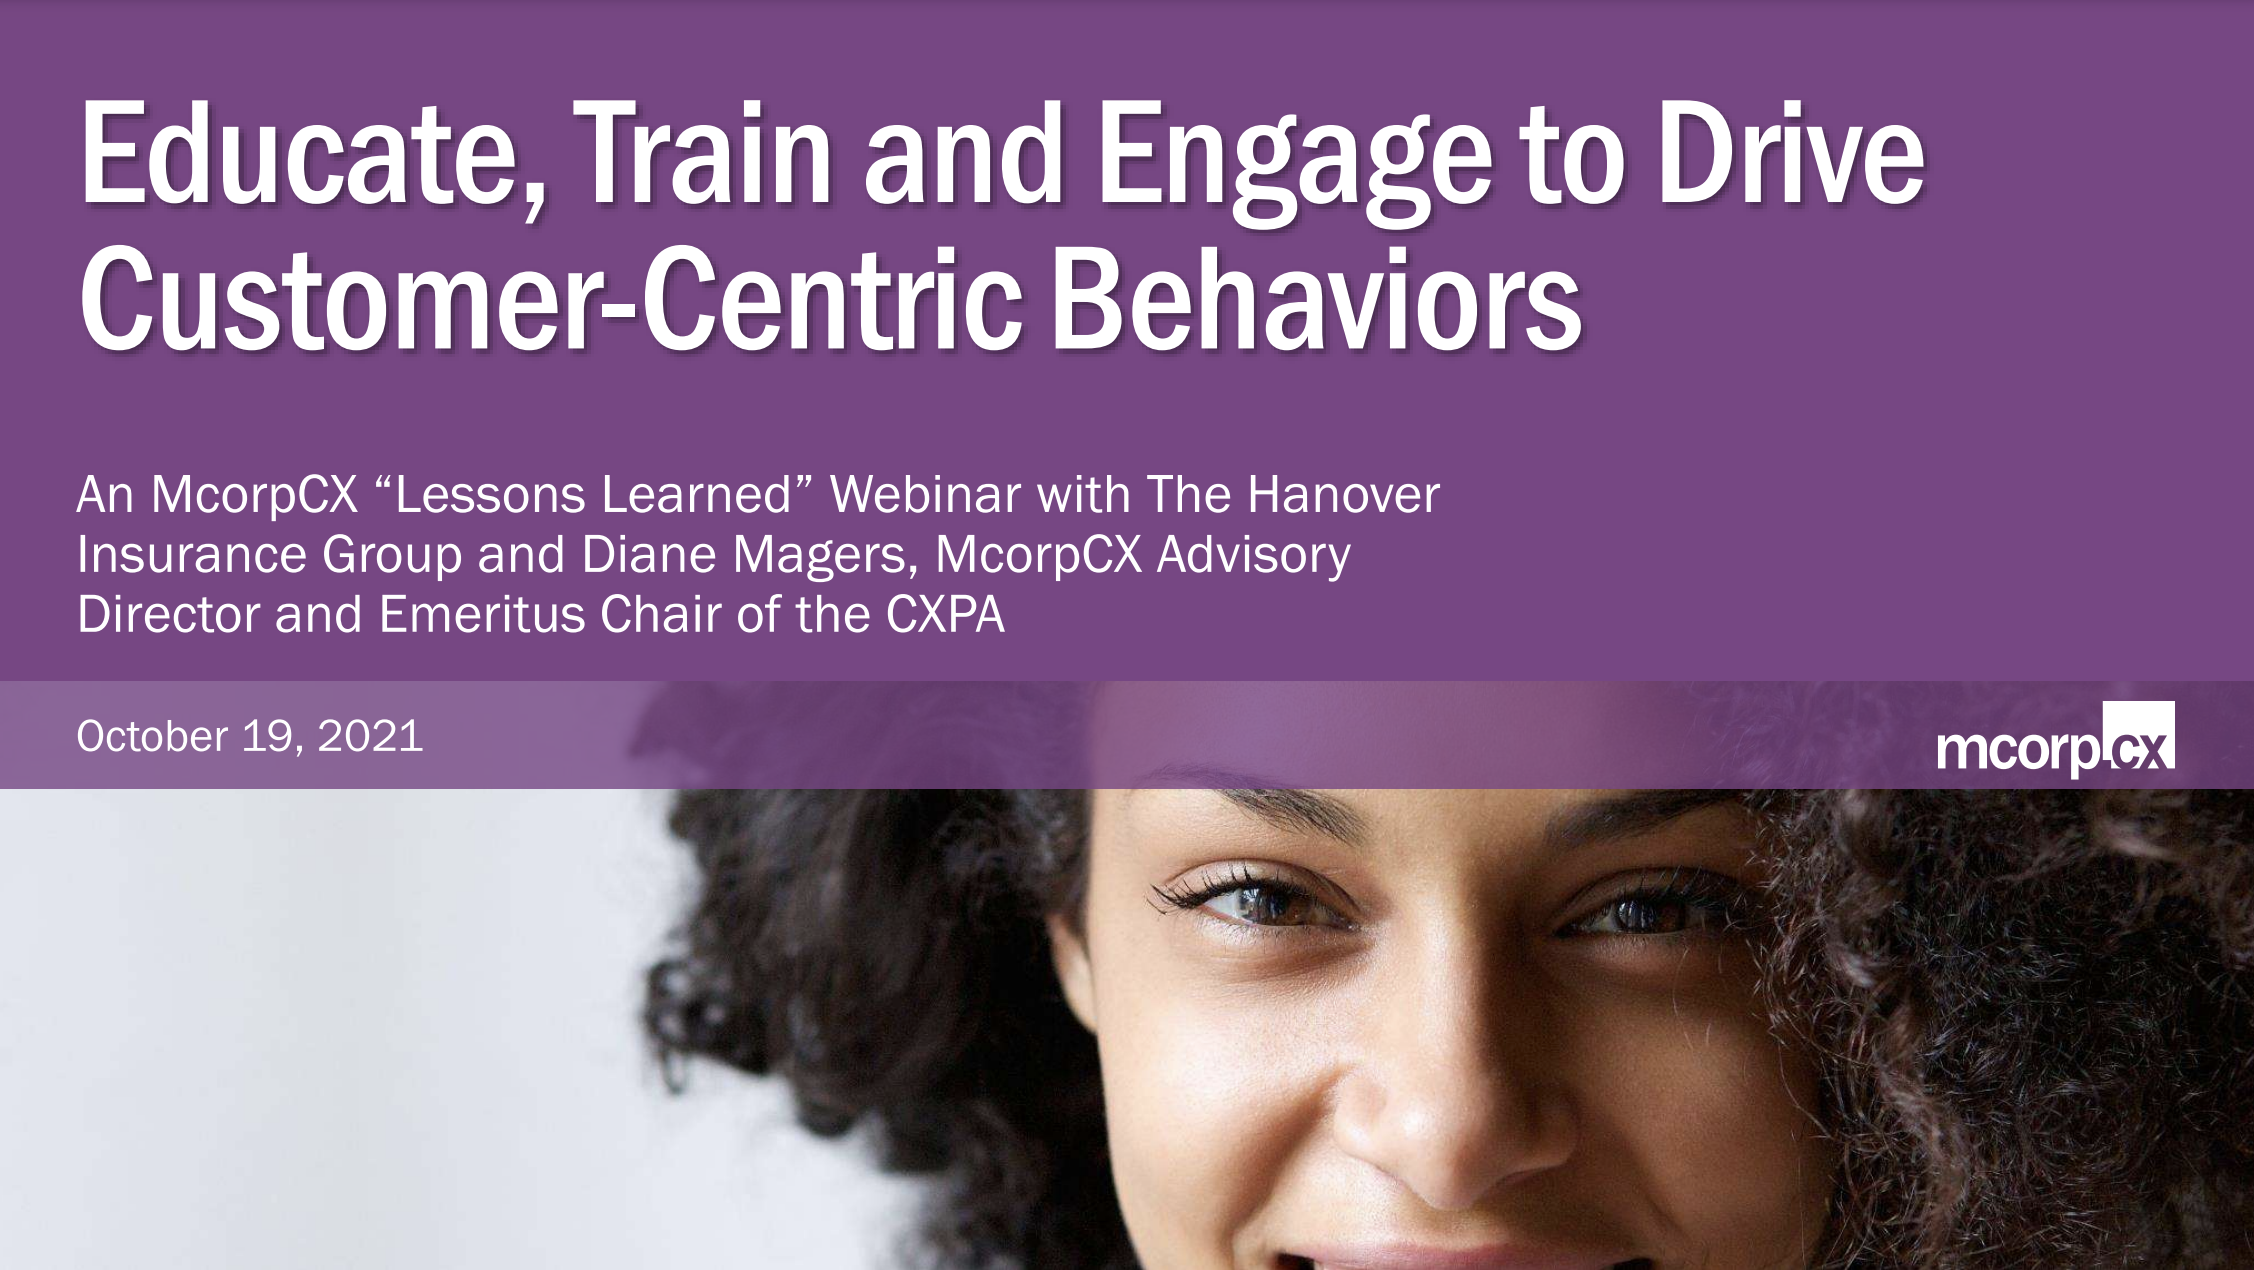 Educate, Train and Engage to Drive Customer Centric Behaviors